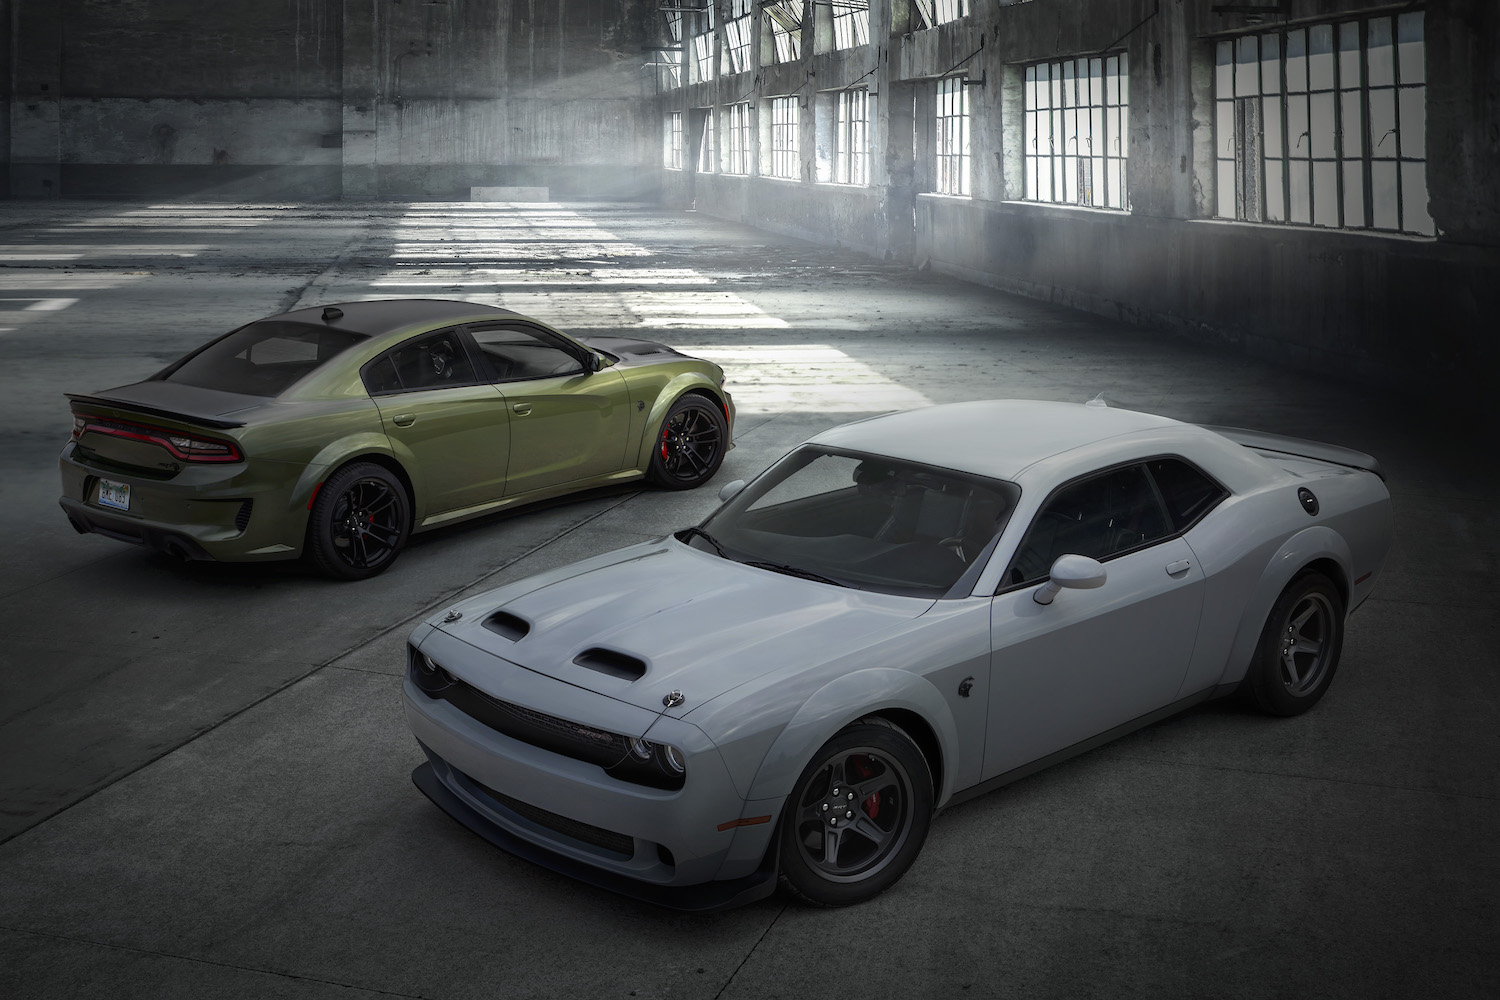 A white Dodge Challenger and green Dodge Charger parked in a warehouse.